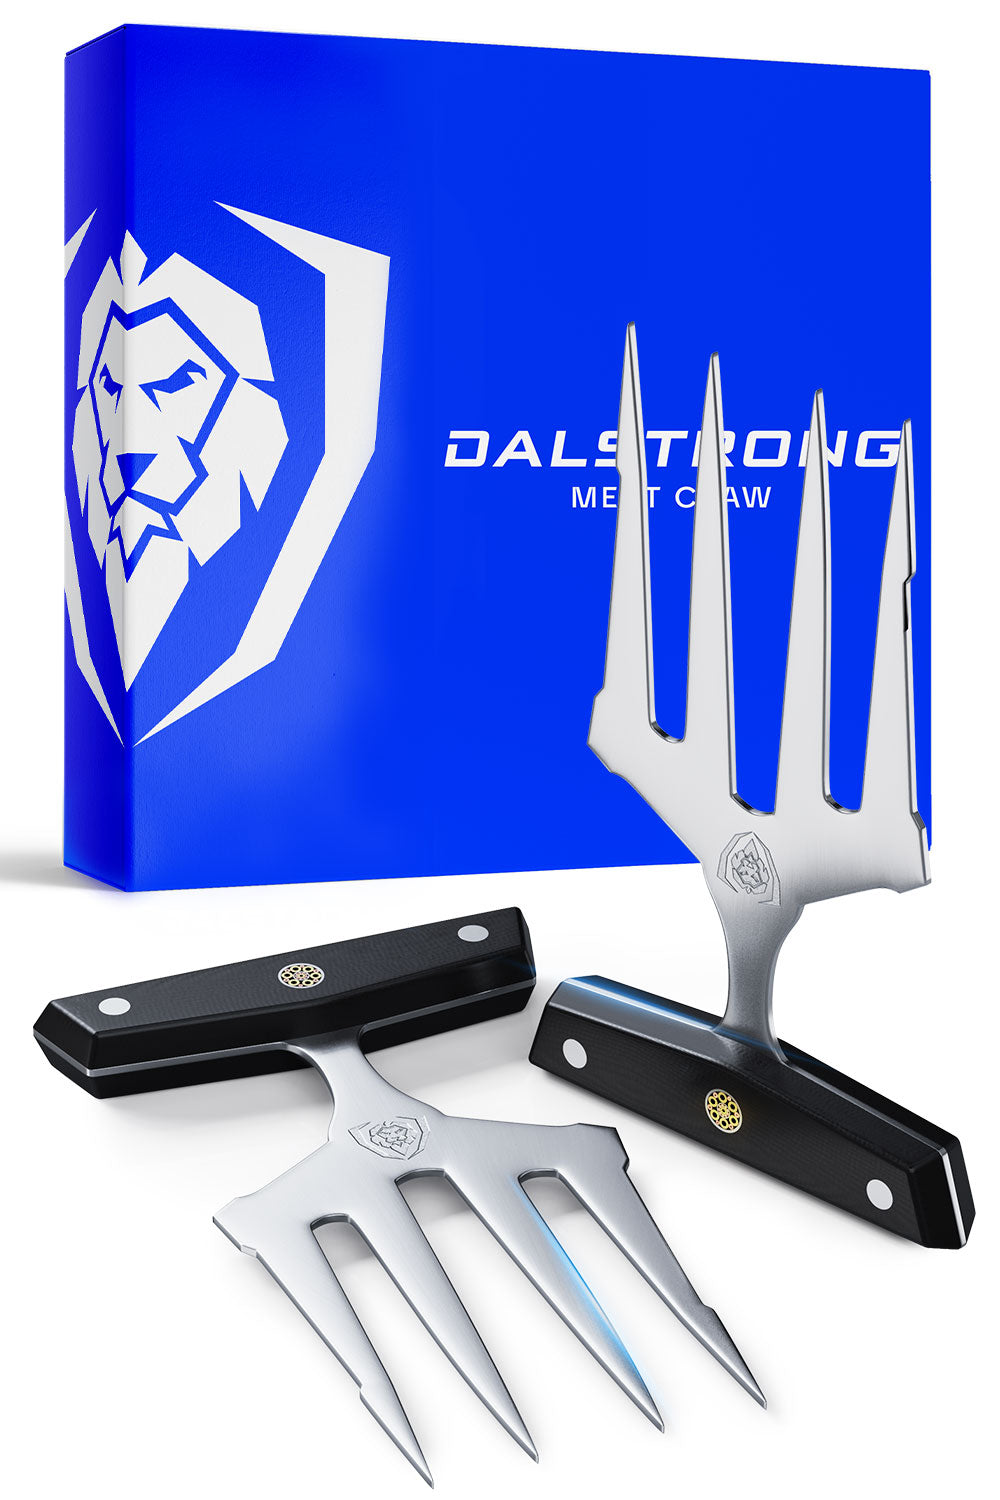 Meat Shredding Claws | Dalstrong ©